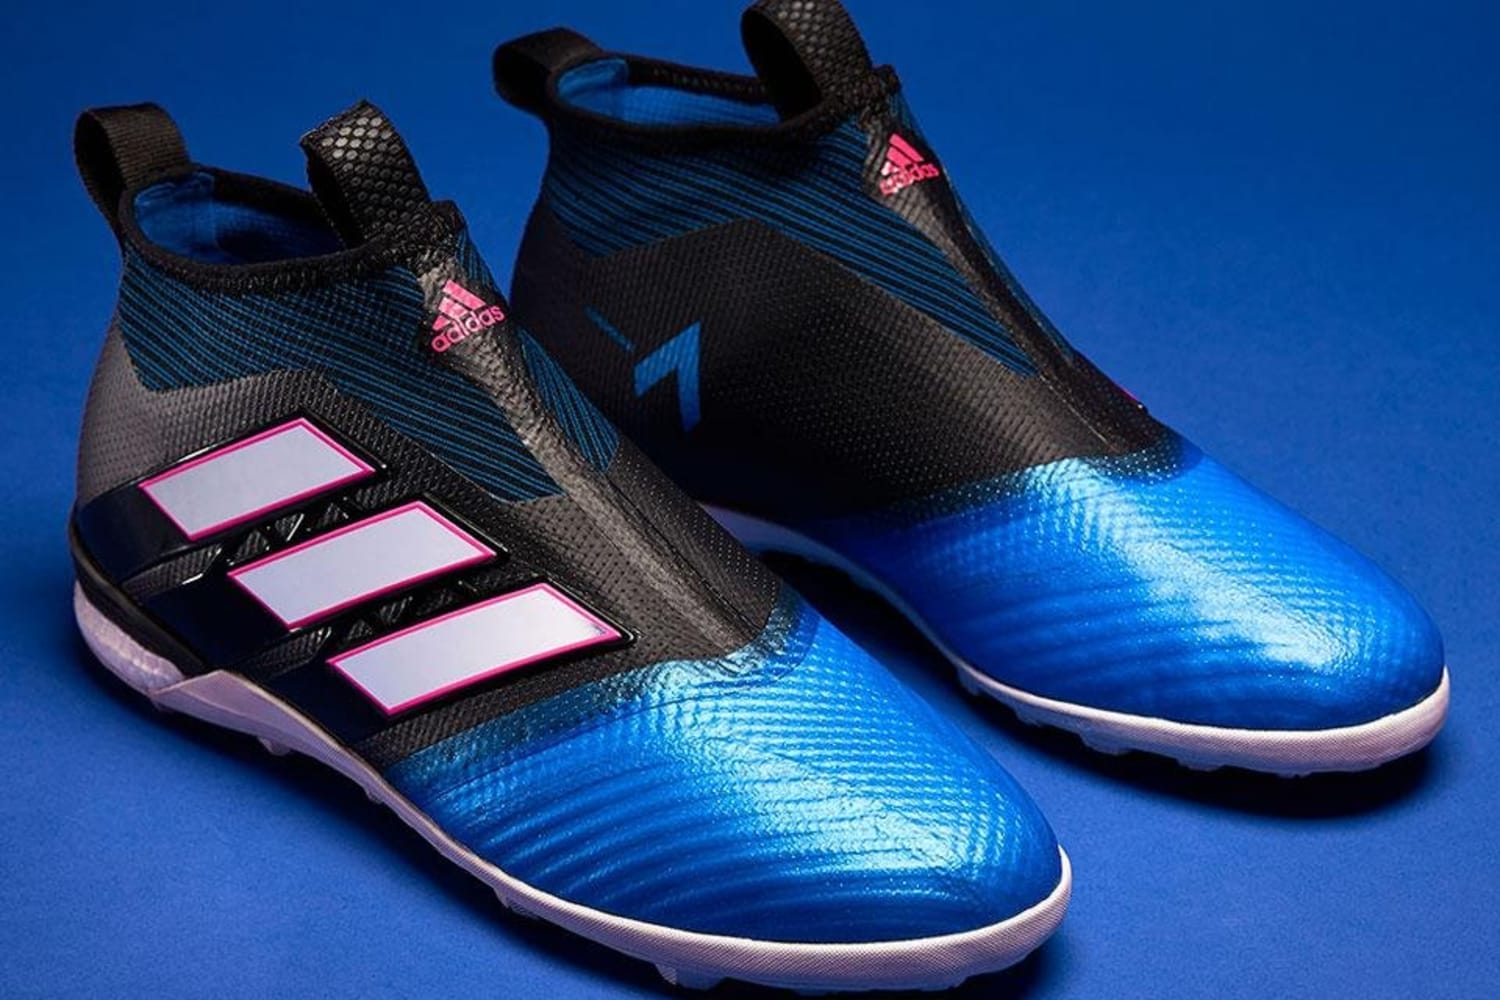 Best football boots for 5-a-side: Top 5